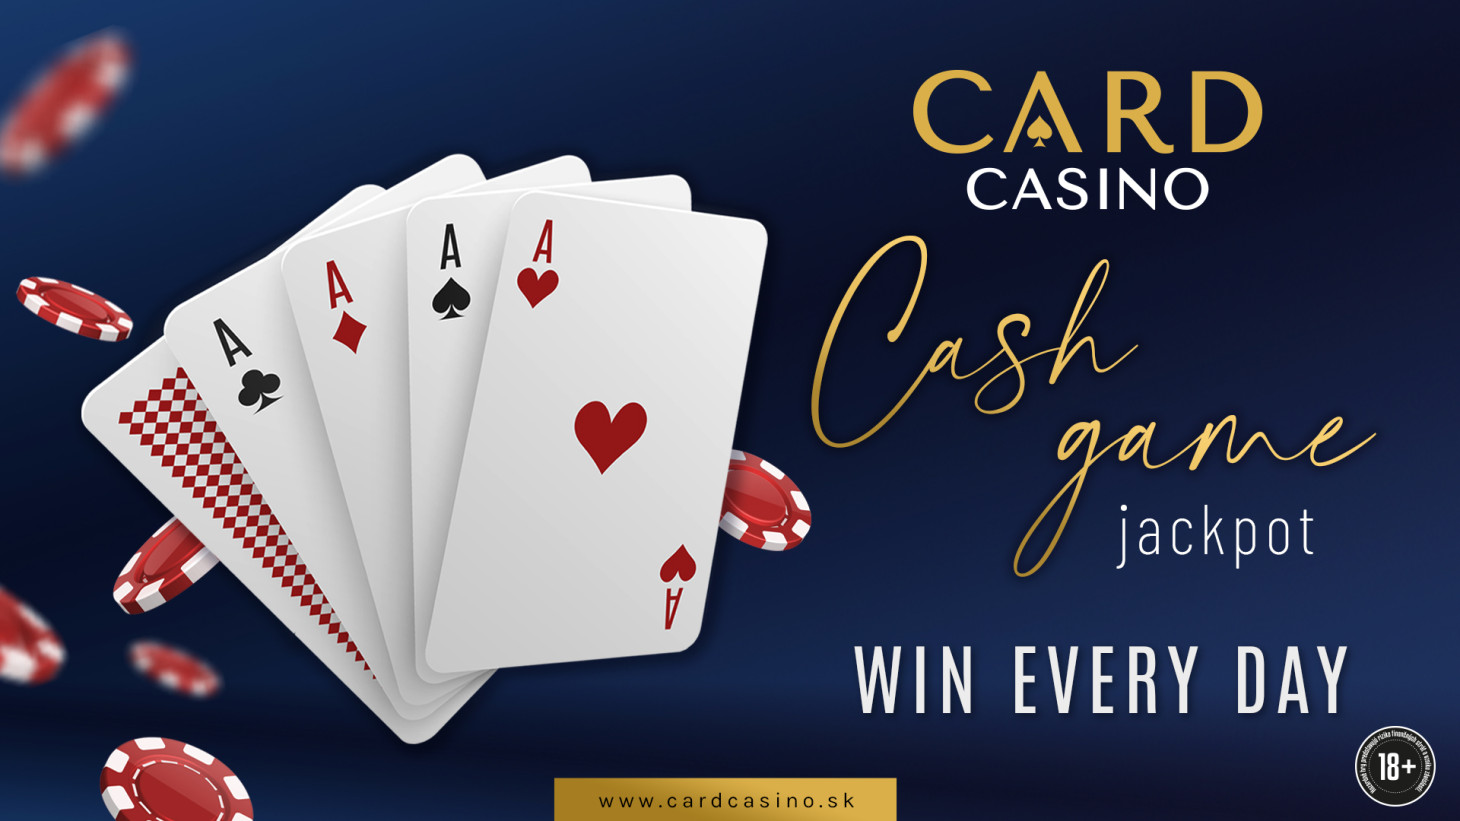 Come to play Cash game to Card Casino, where generous jackpots await you